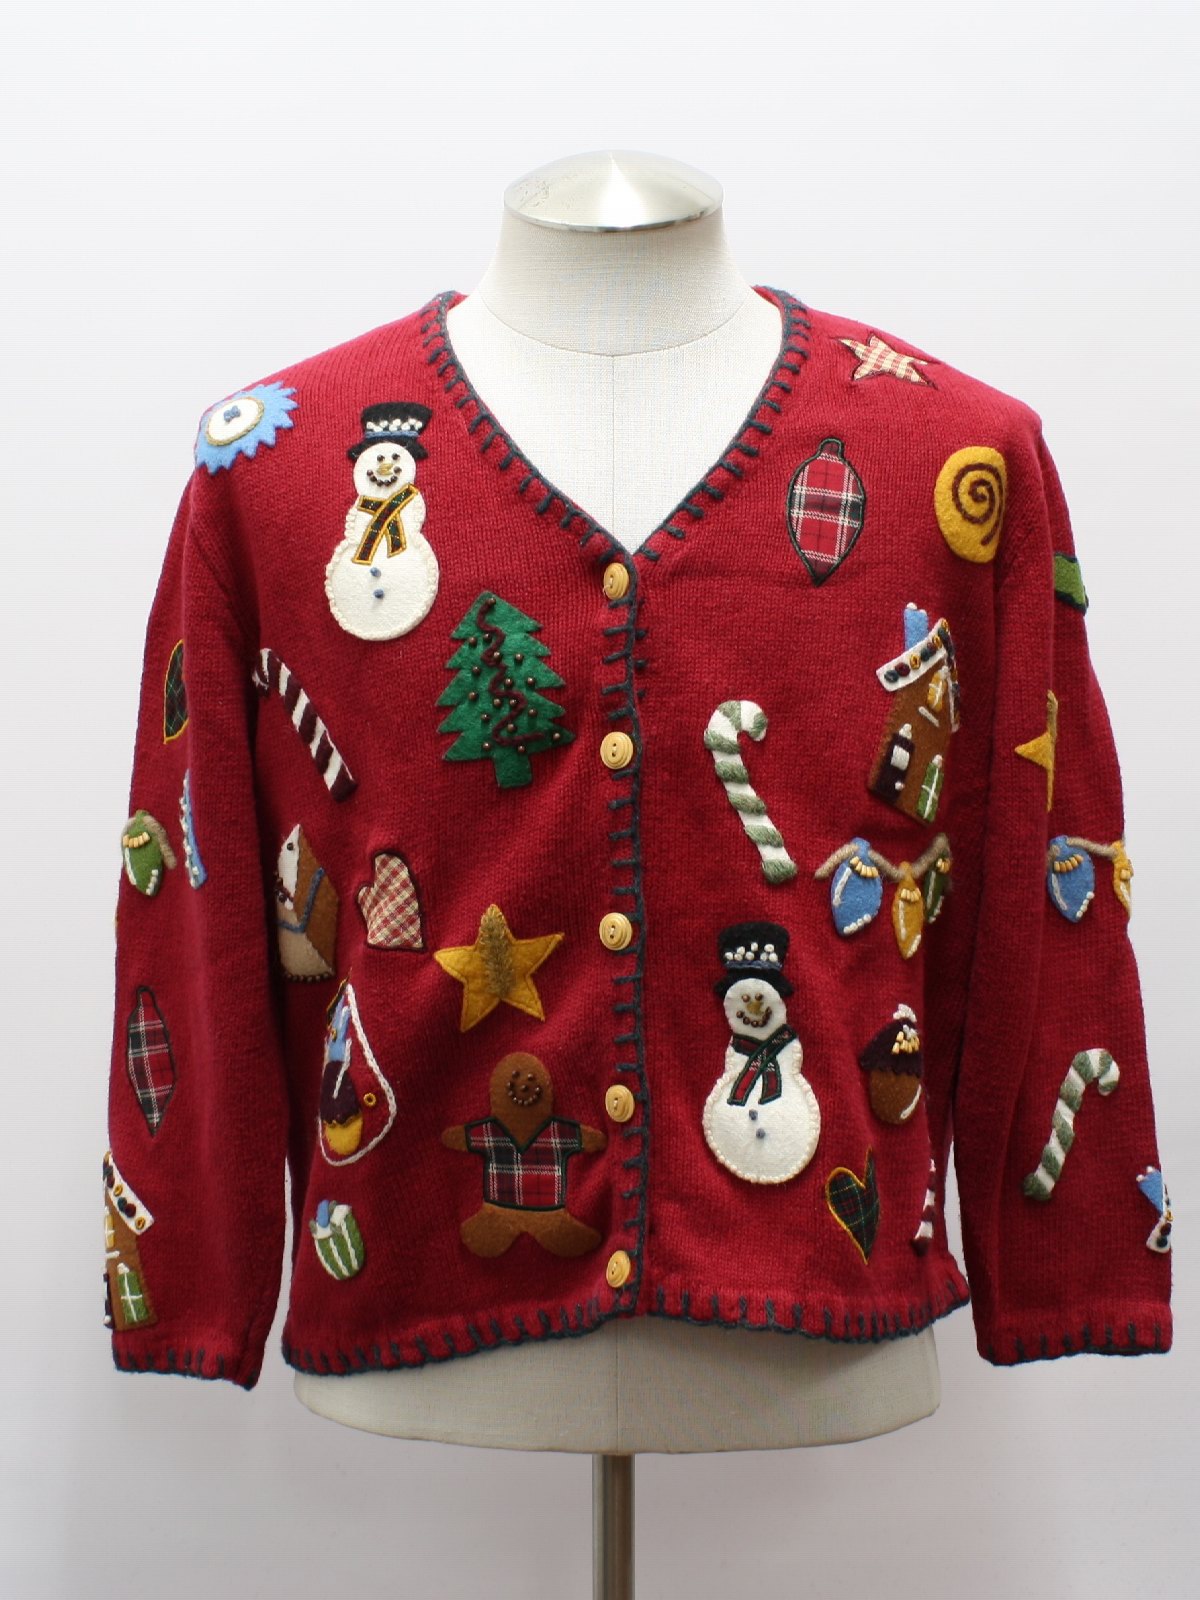 Womens Ugly Christmas Sweater : -Susan Bristol- Womens red, yellow ...